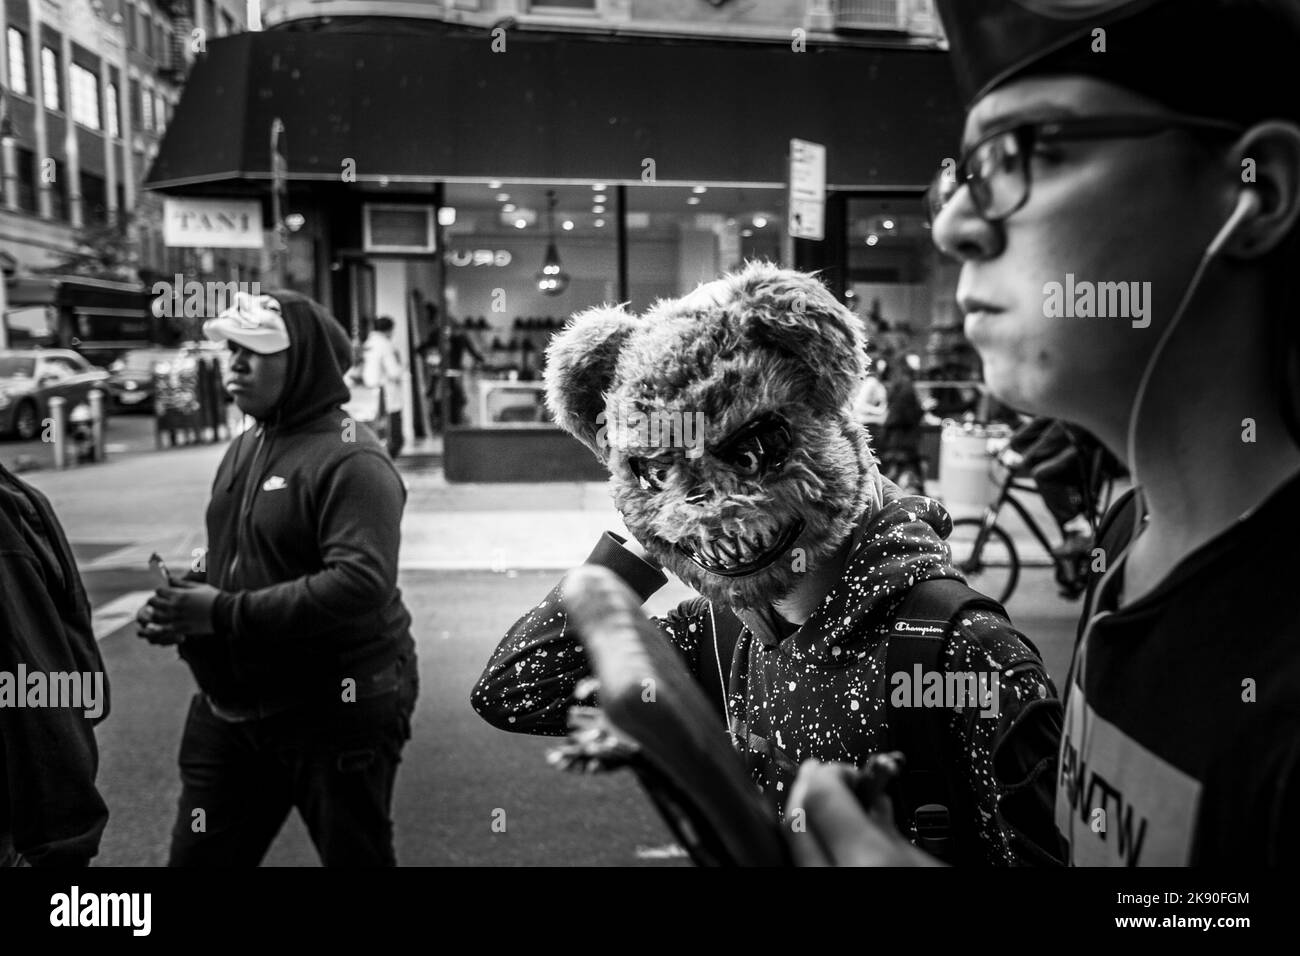 A black and white shot of people in costumes during Halloween, New York Stock Photo